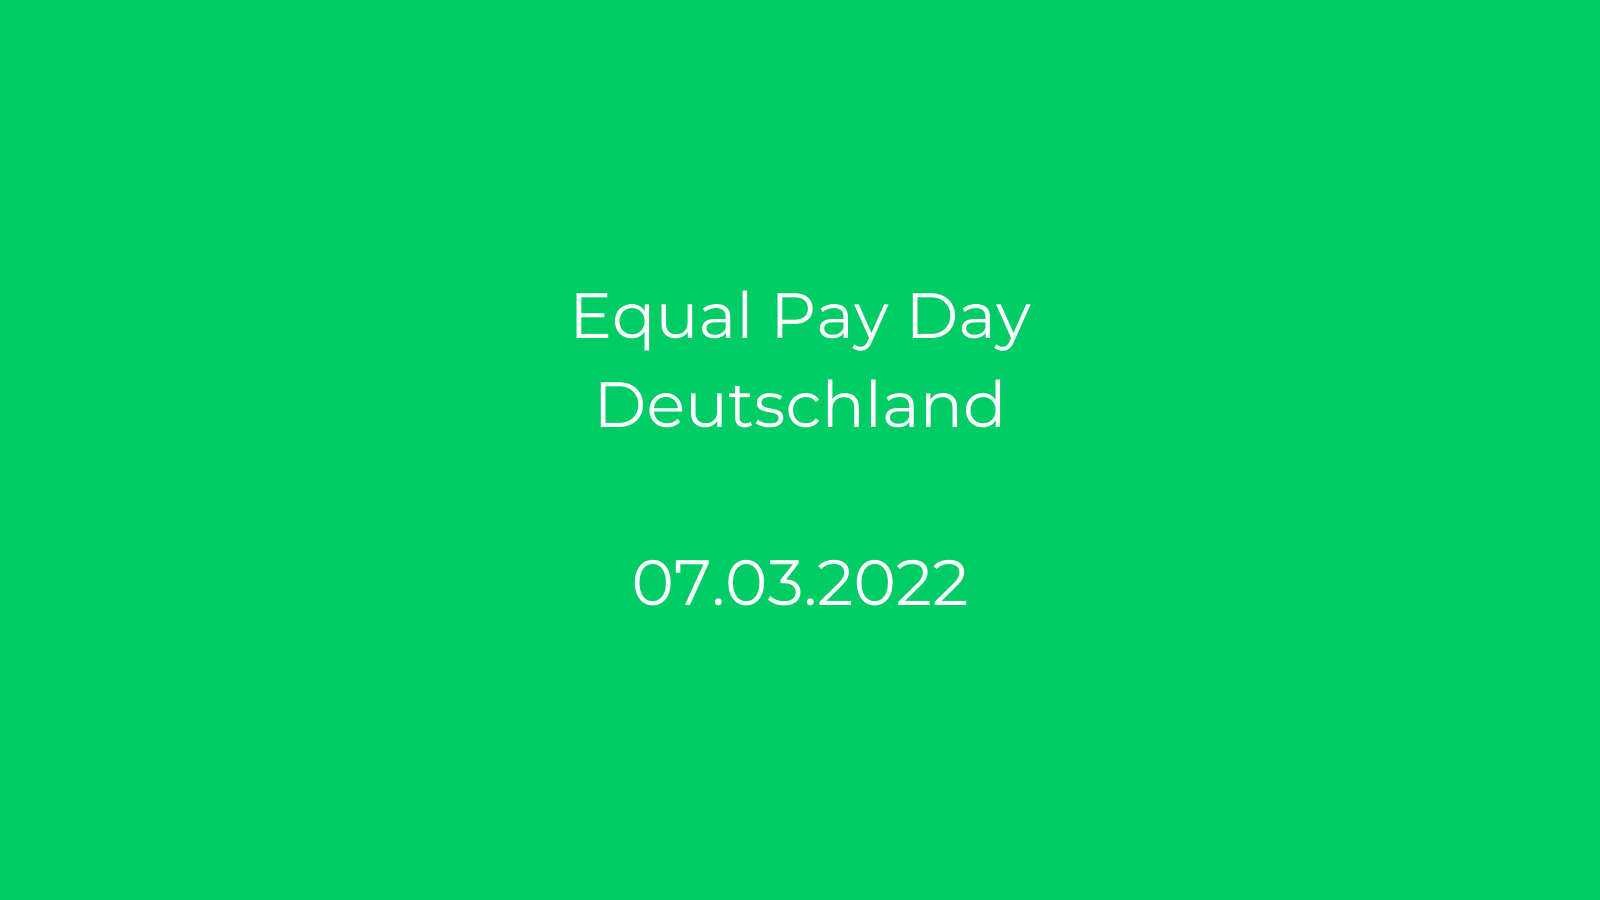 Am Montag 07032022 ist Equal Pay Day